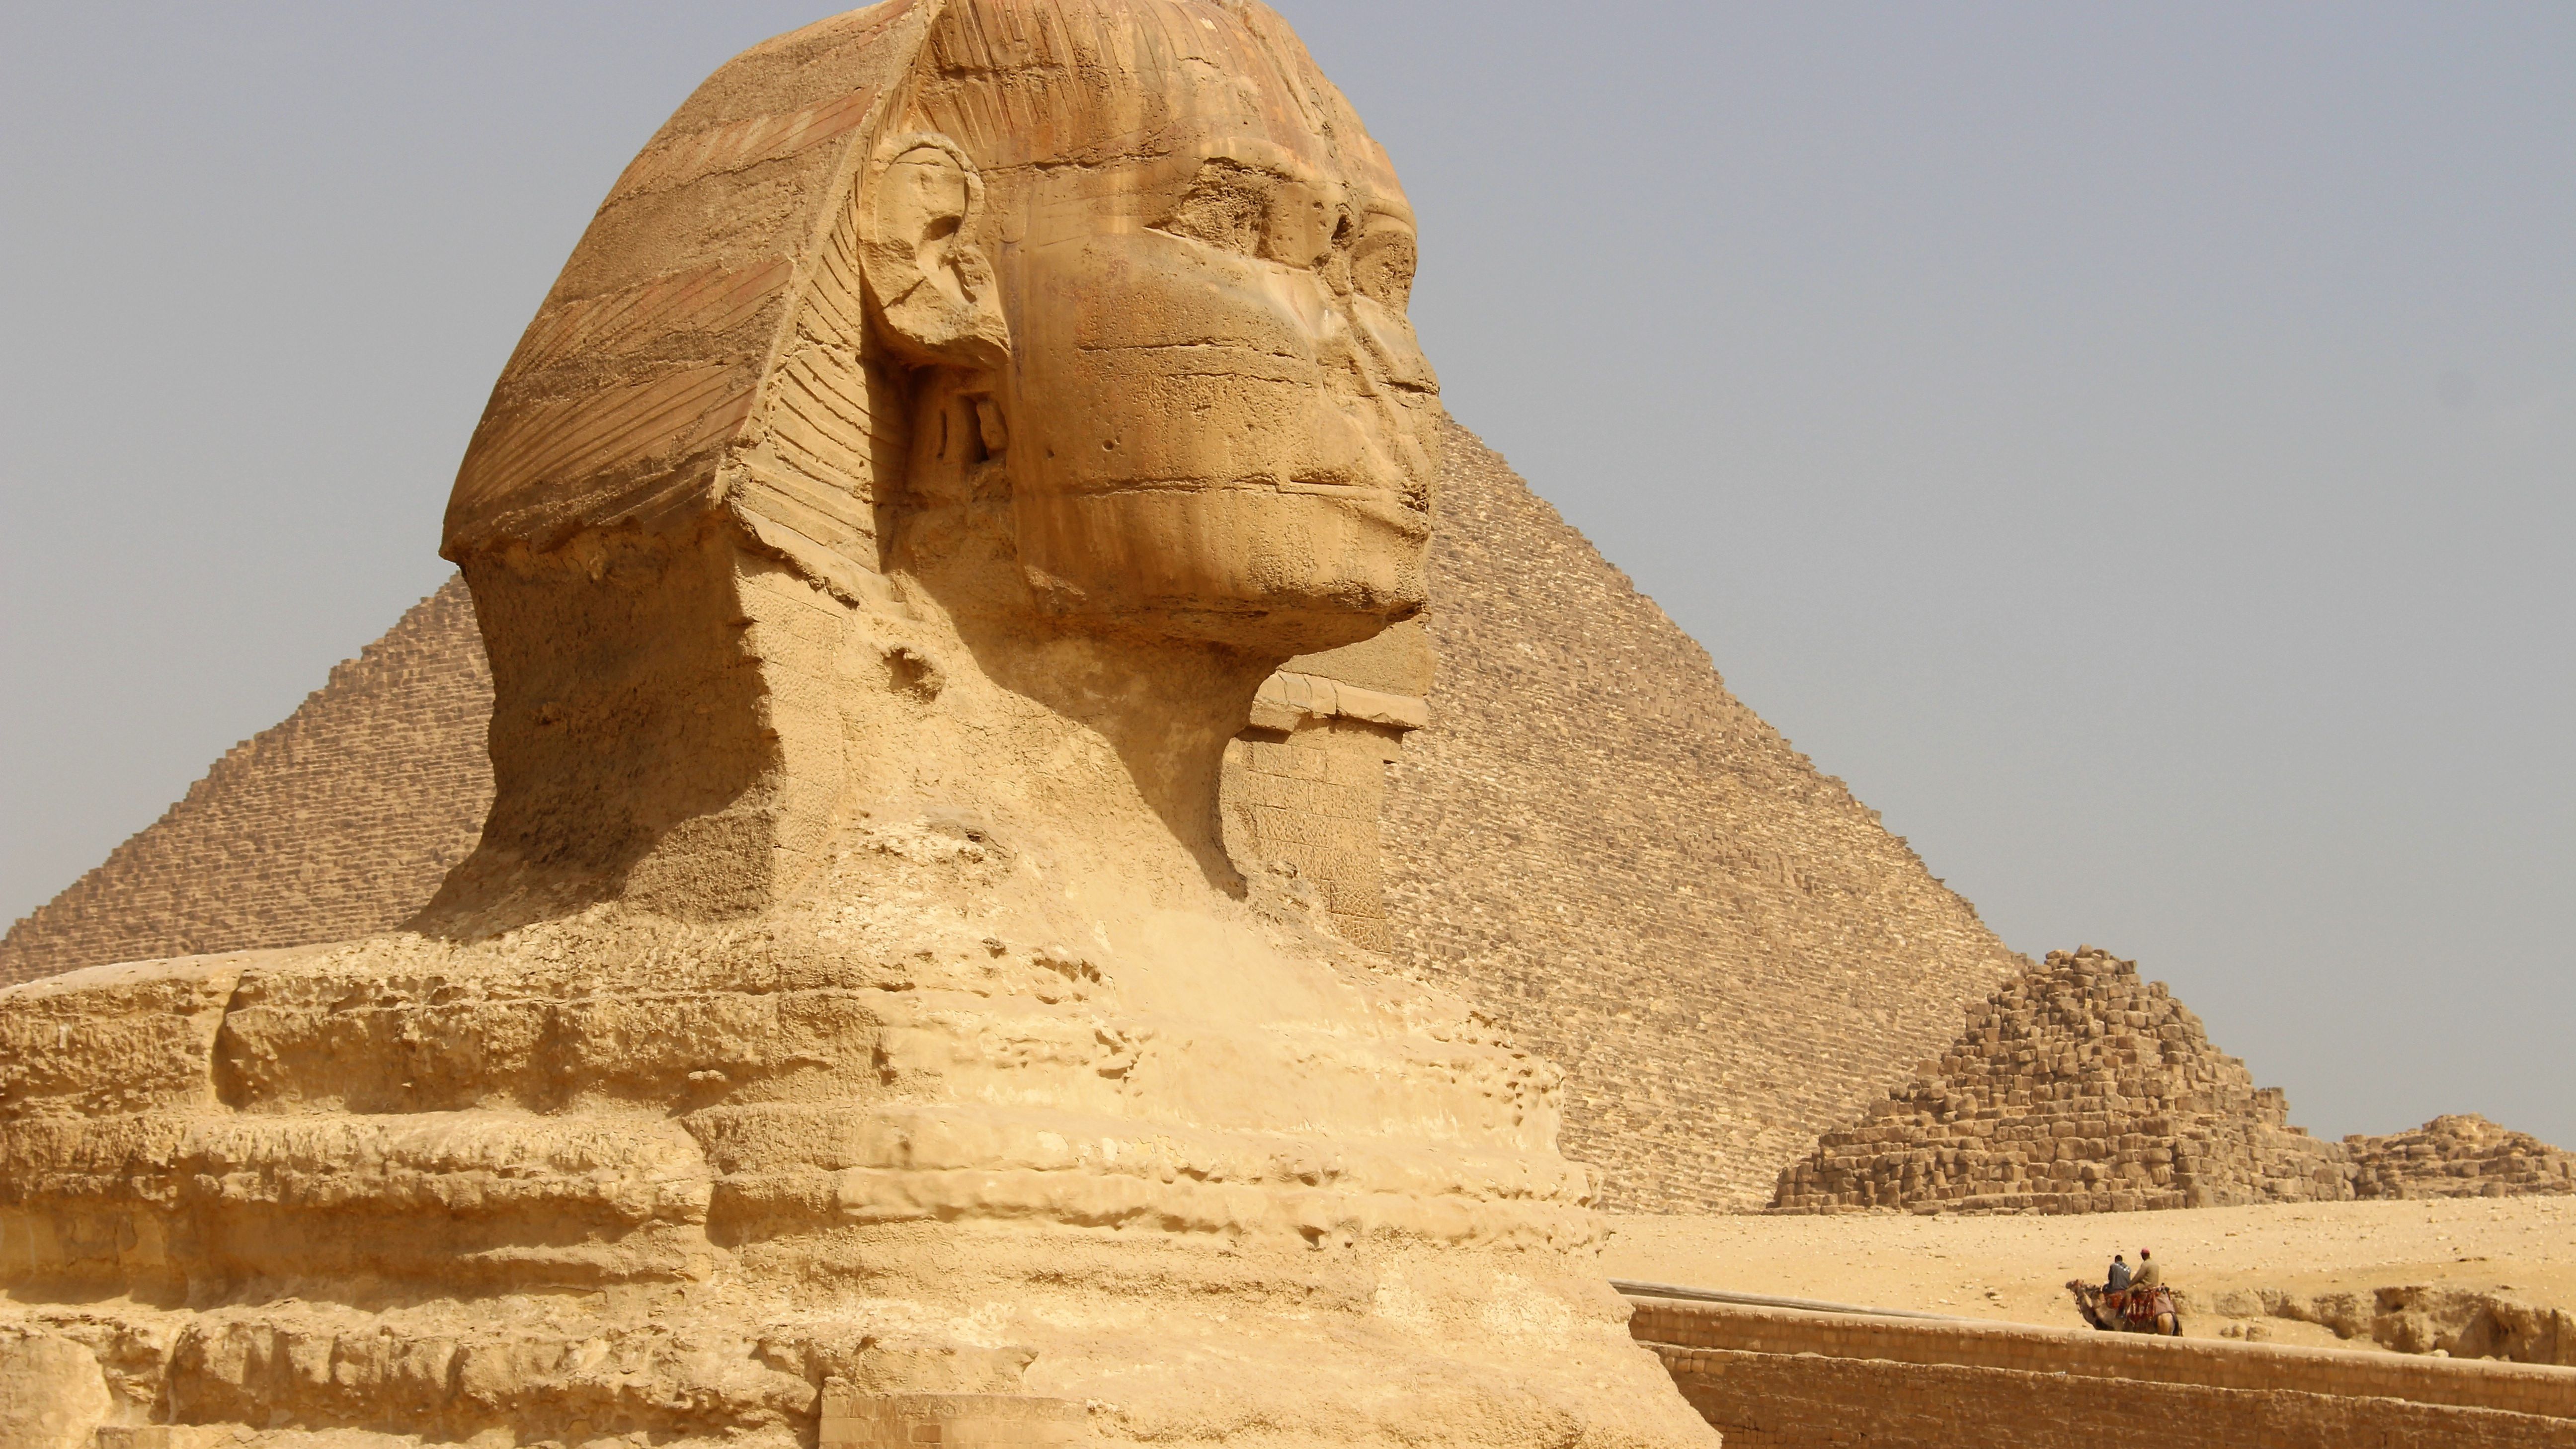 The Egyptians did not build the Great Sphinx of Giza alone